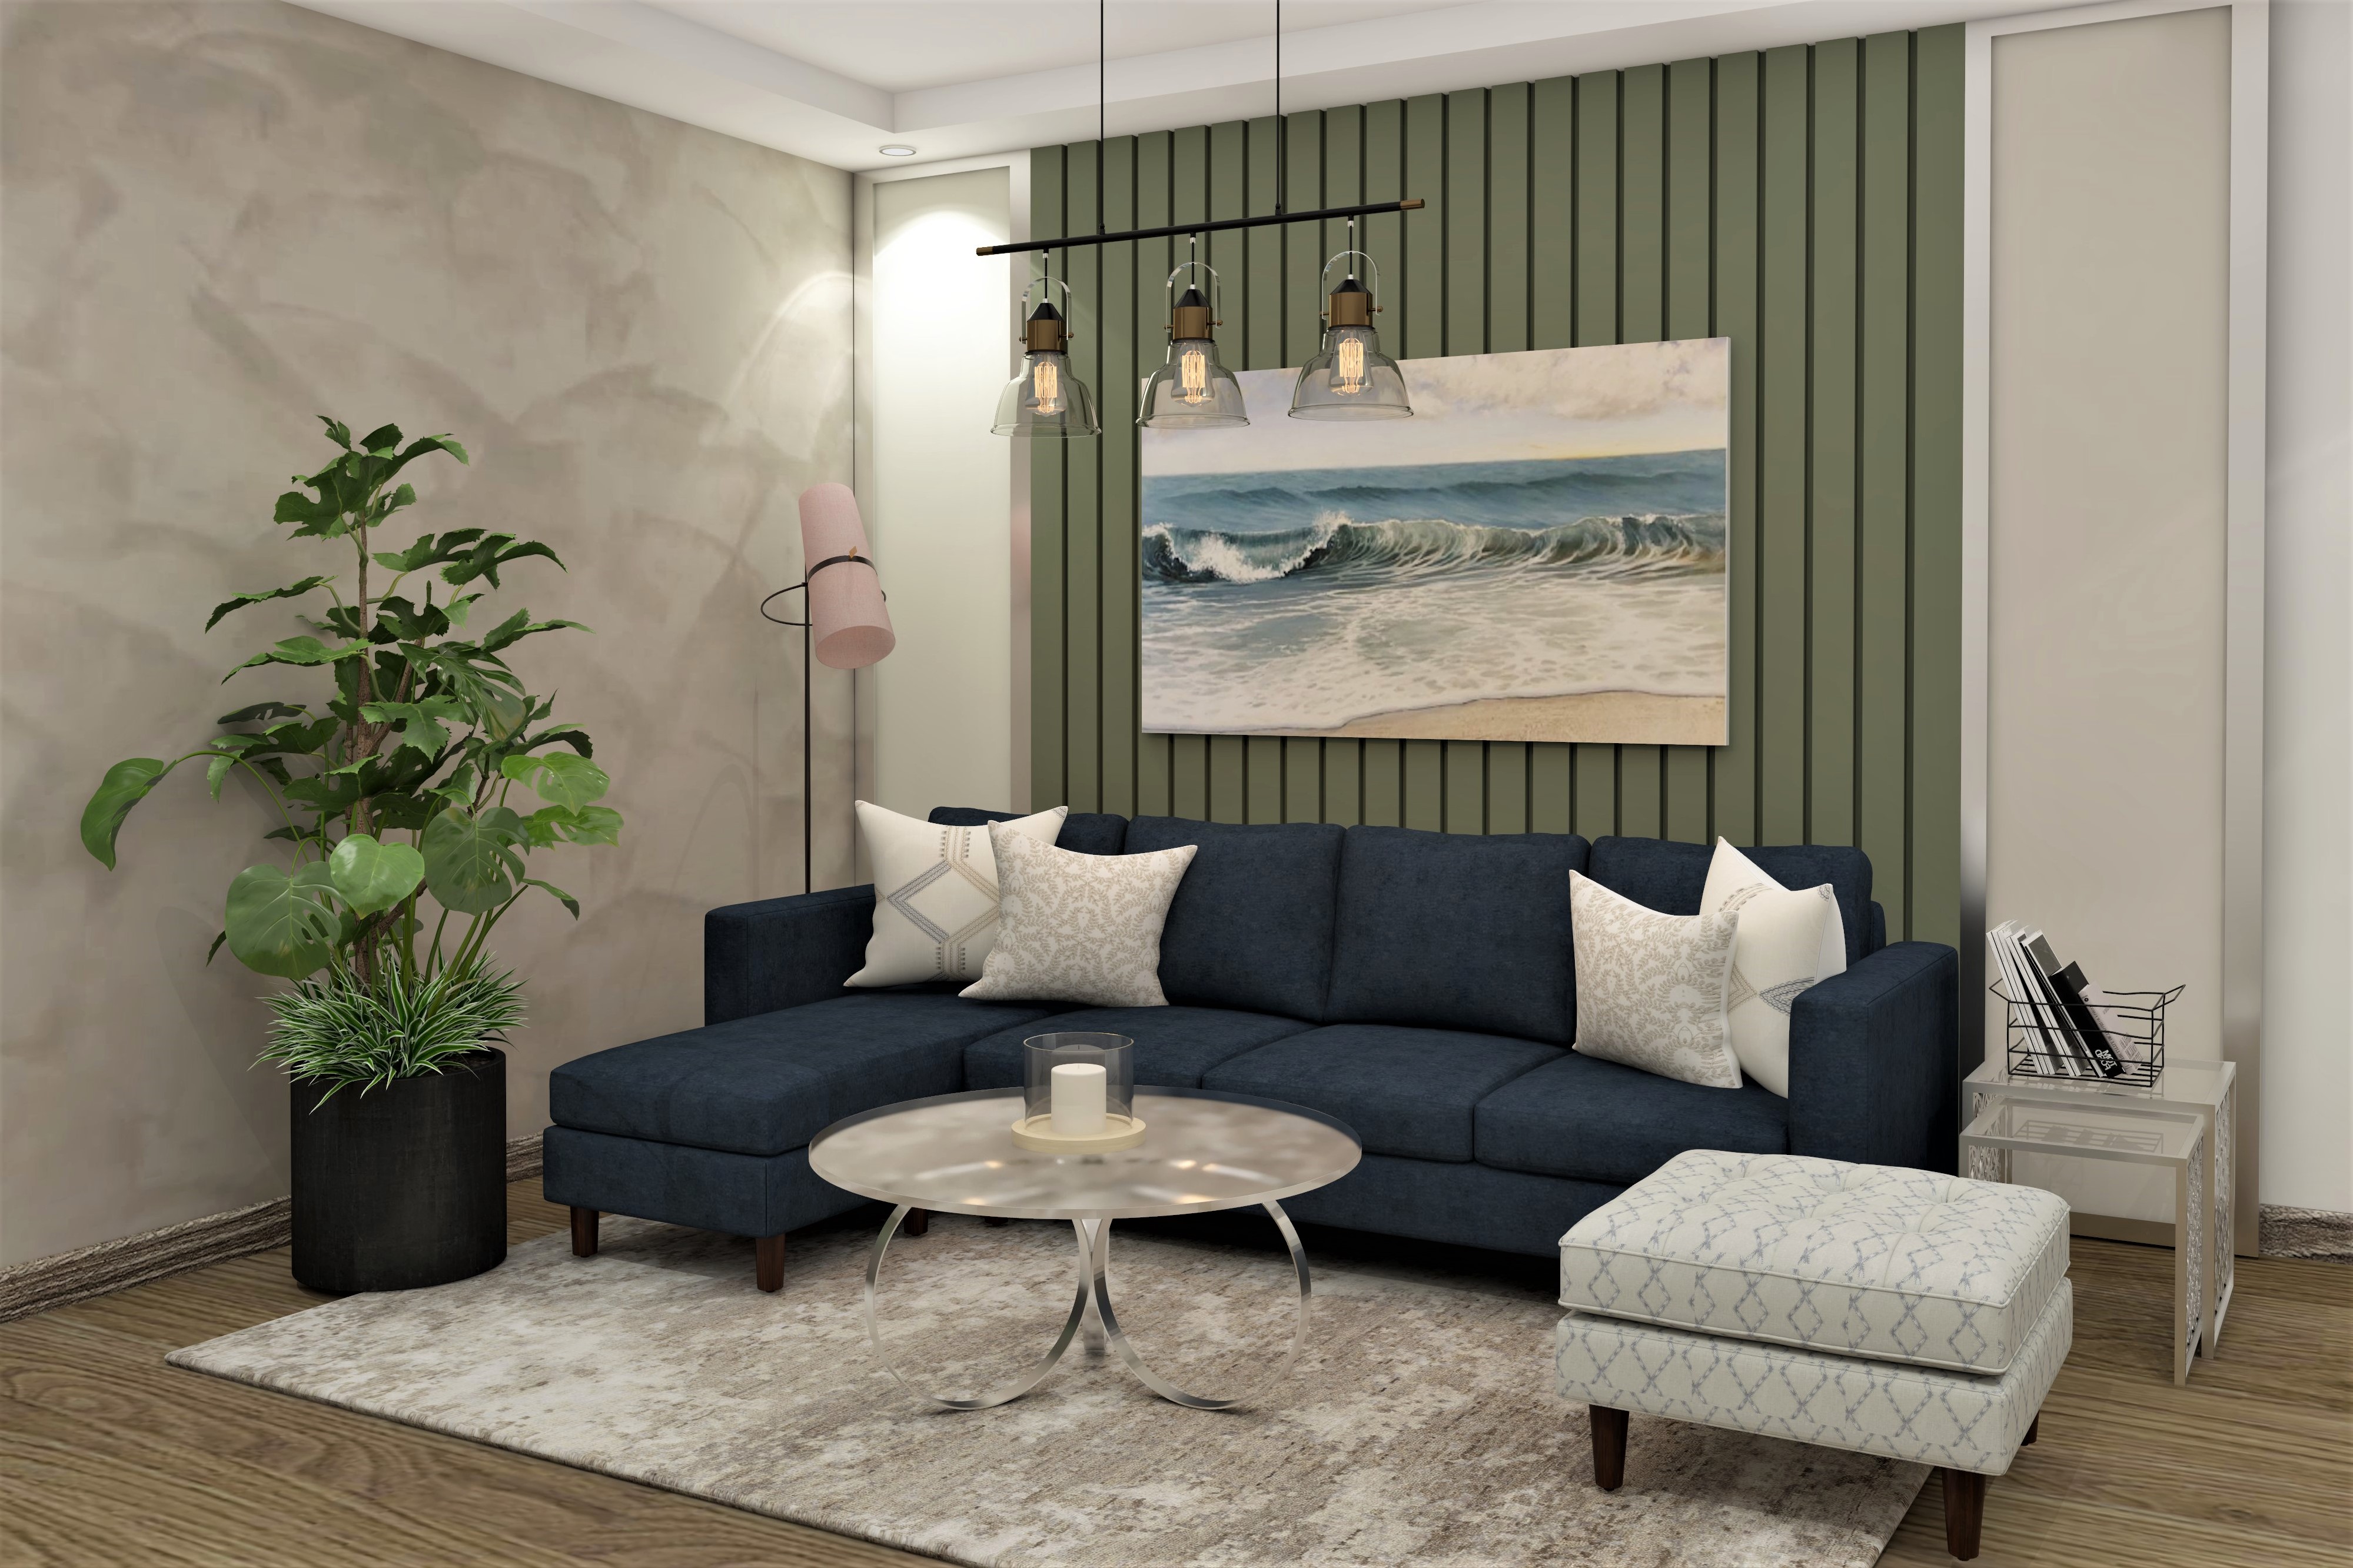 Small living room with blue sofa and green wall paneling-Beautiful Homes